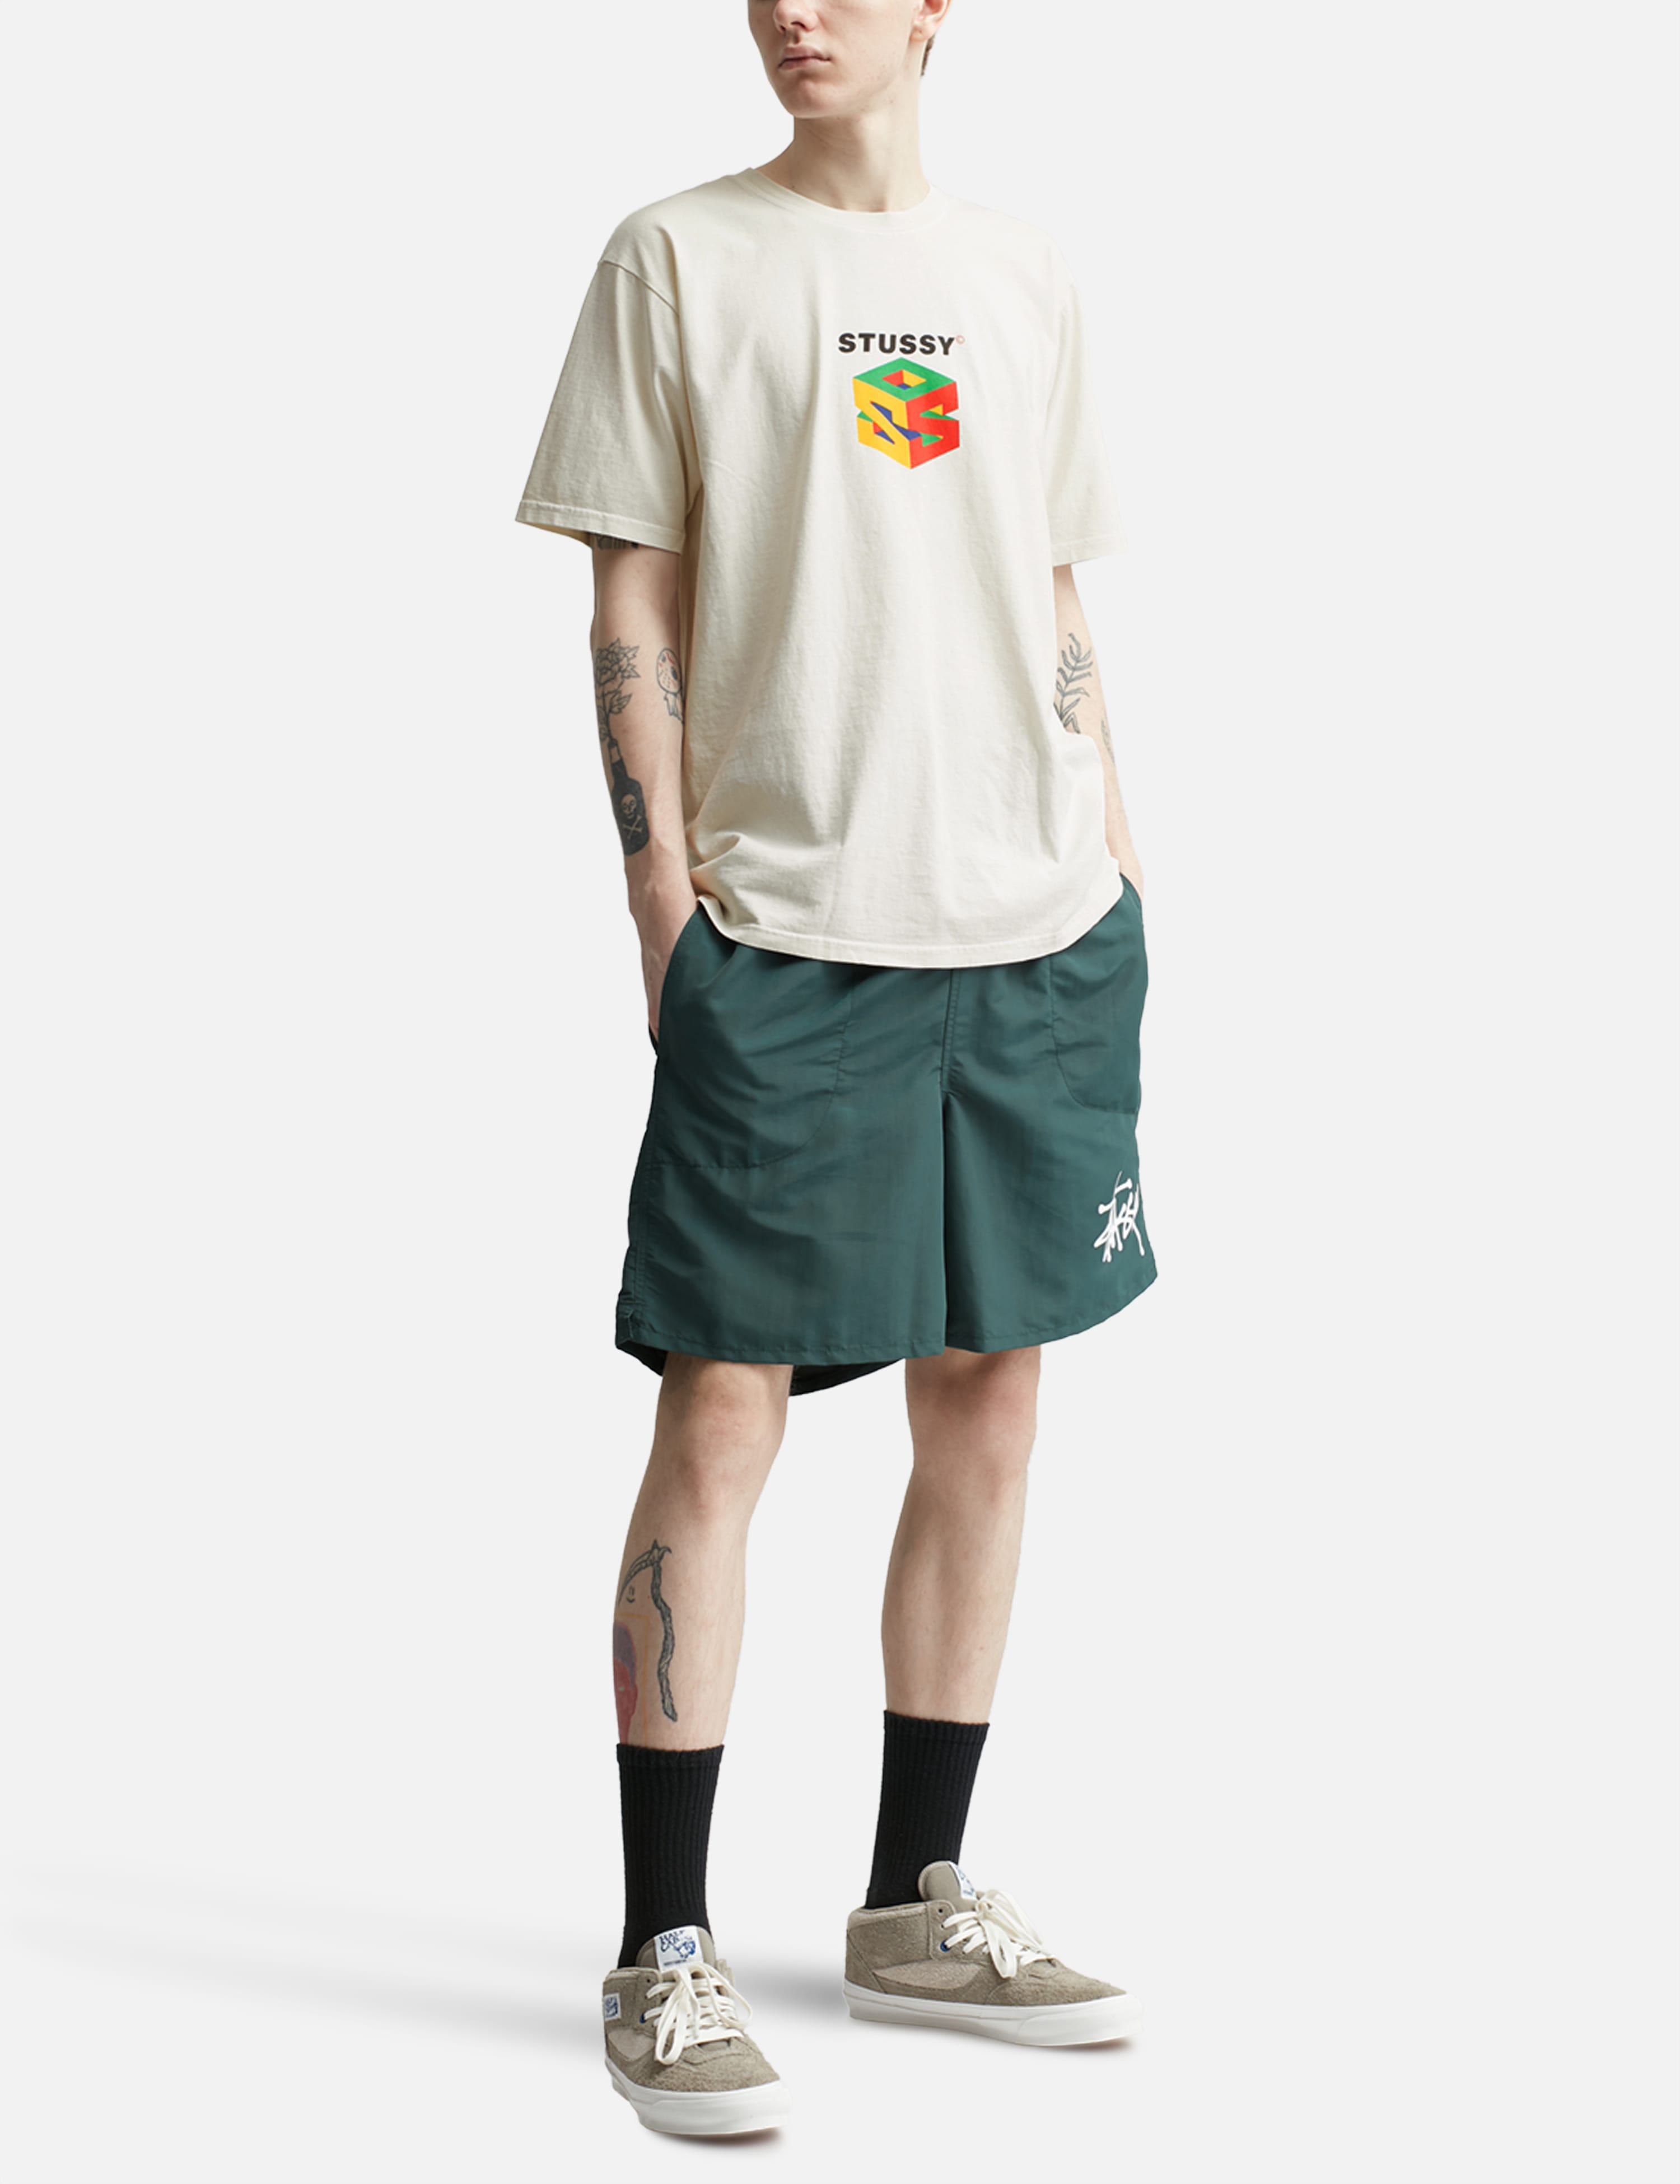 S64 Pigment Dyed Tee STUSSY